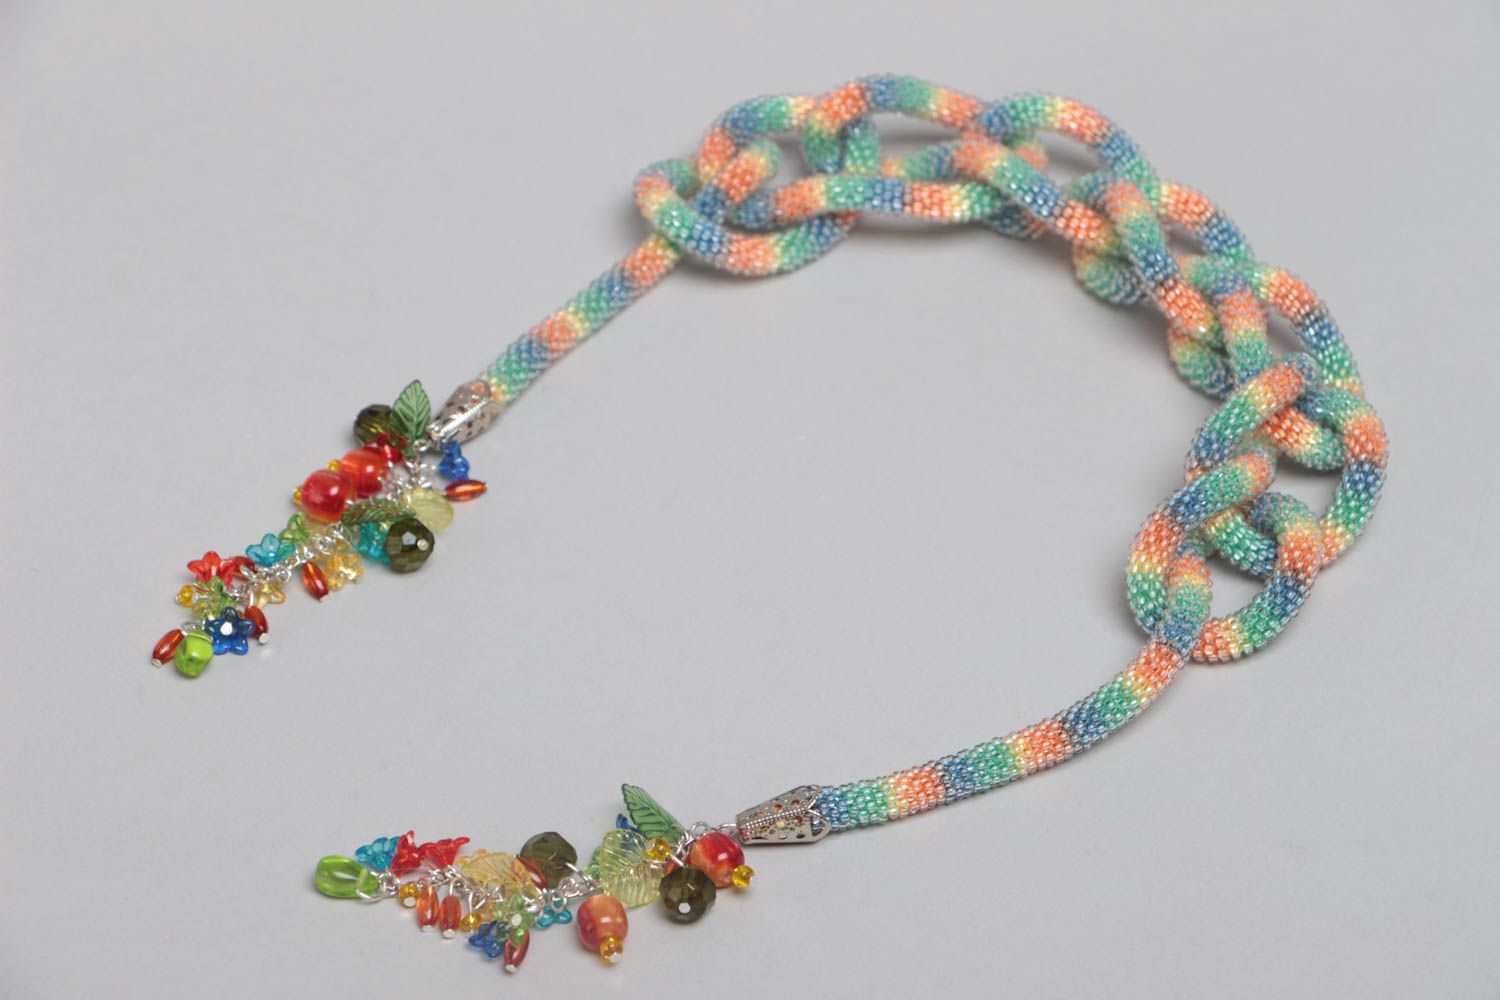 Handmade designer bead woven cord necklace with tender rainbow coloring   photo 2